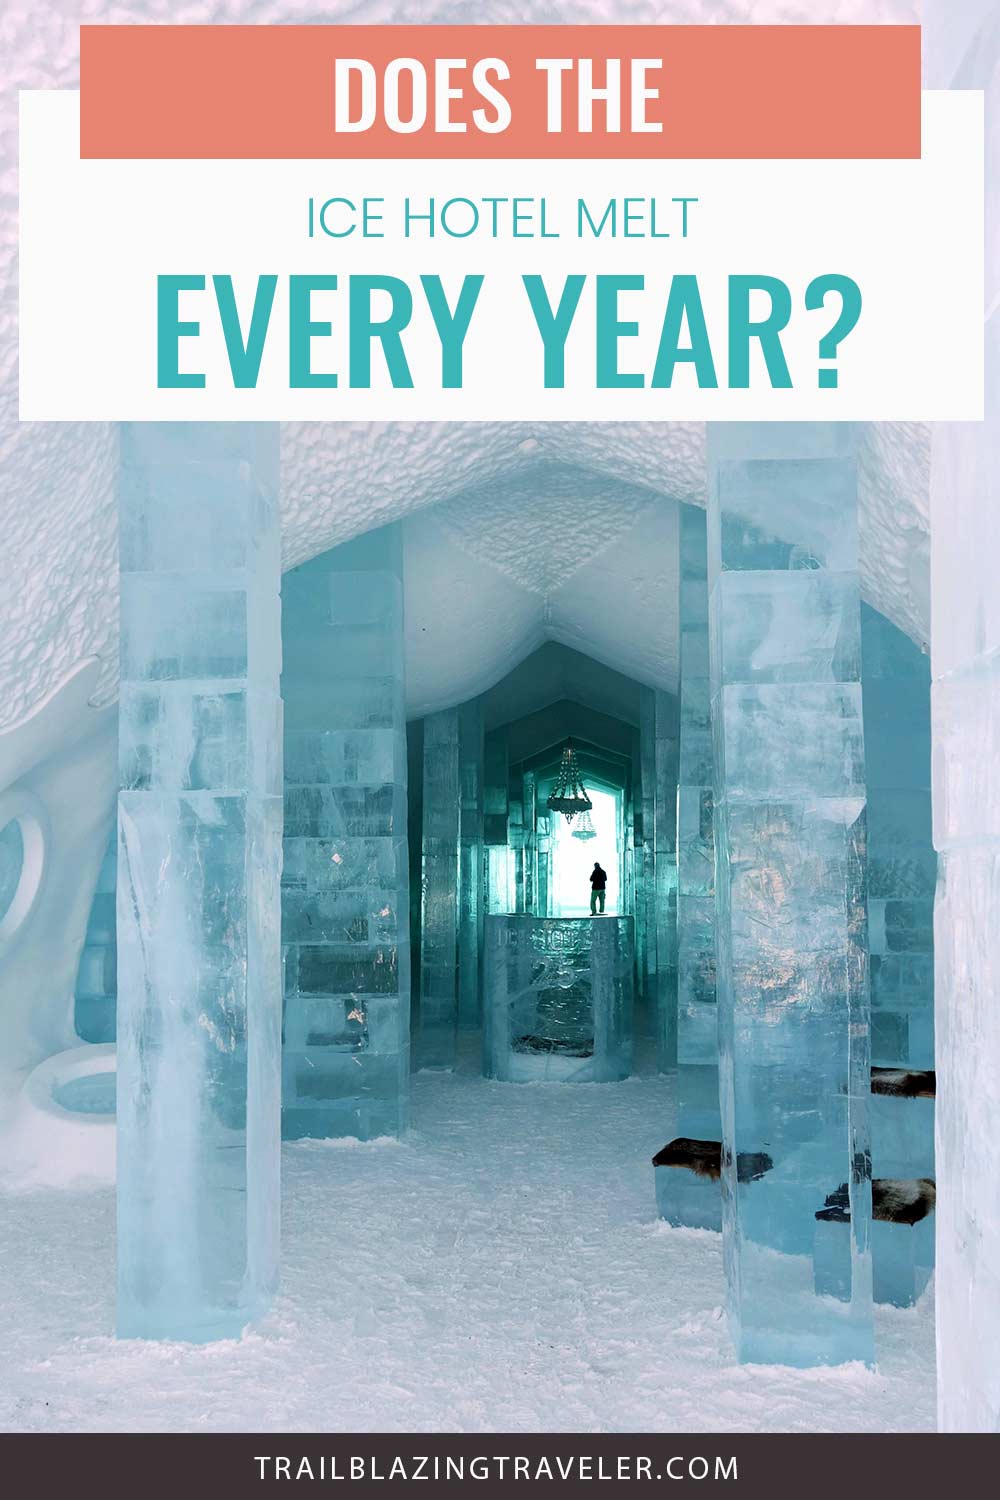 Interior of an Ice hotel - does it melt every year?